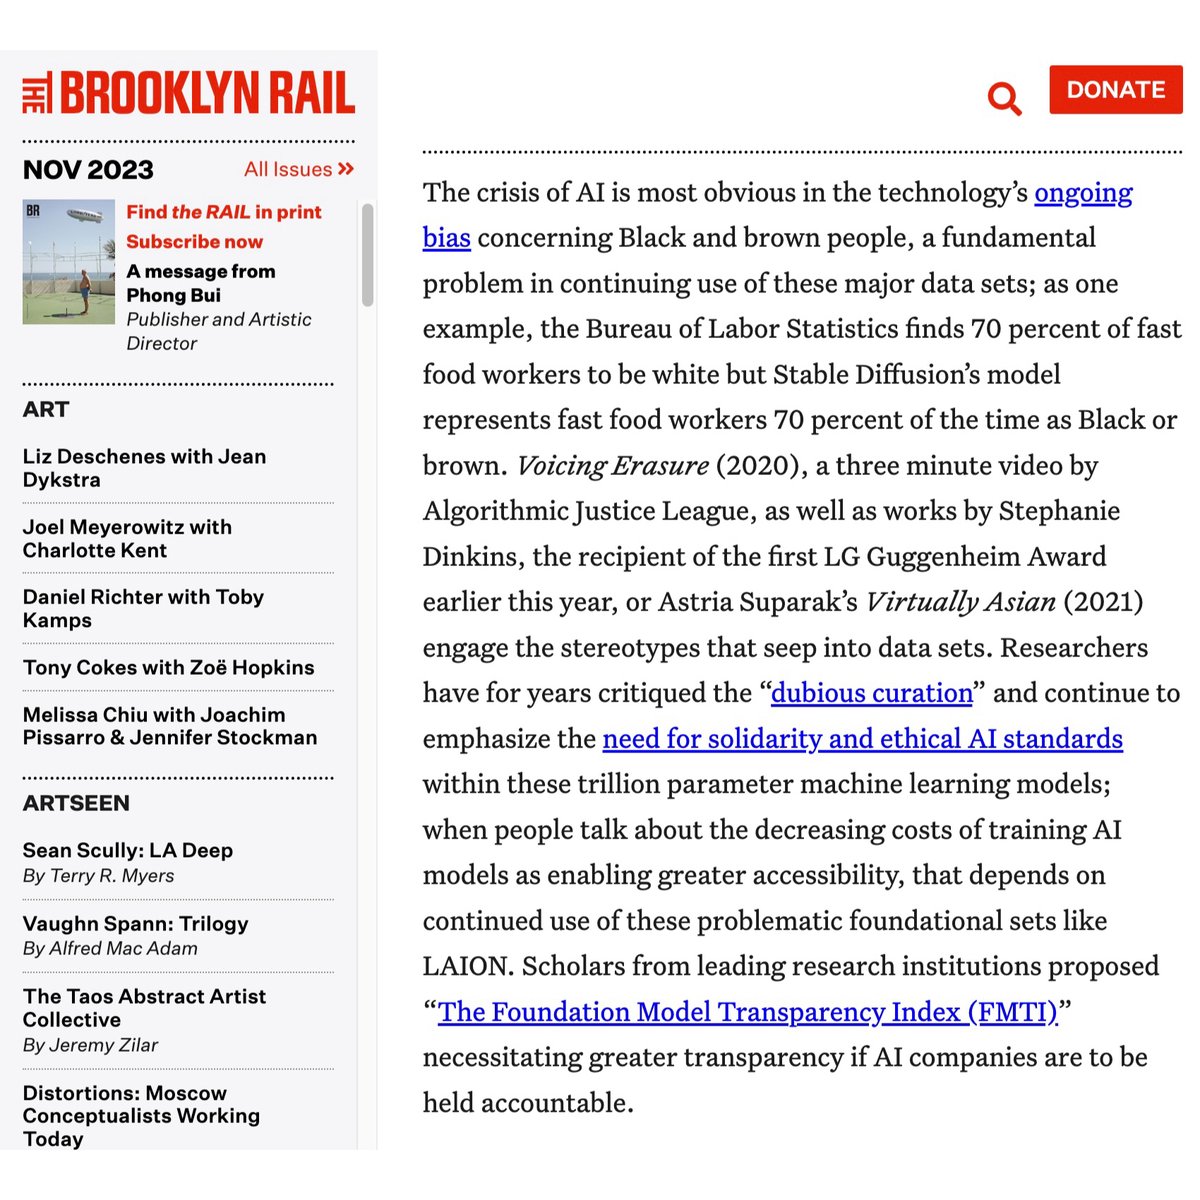 For those outside of New York, an updated version of my installation 'White Robot Tears' is on view at @ArtSciMuseum in Singapore, and the Bloomberg Connects app has a mobile version. 'Crisis, A Critical Imaginary' by @Lucy2Scribbles in @TheBrooklynRail brooklynrail.org/2023/11/art-te…